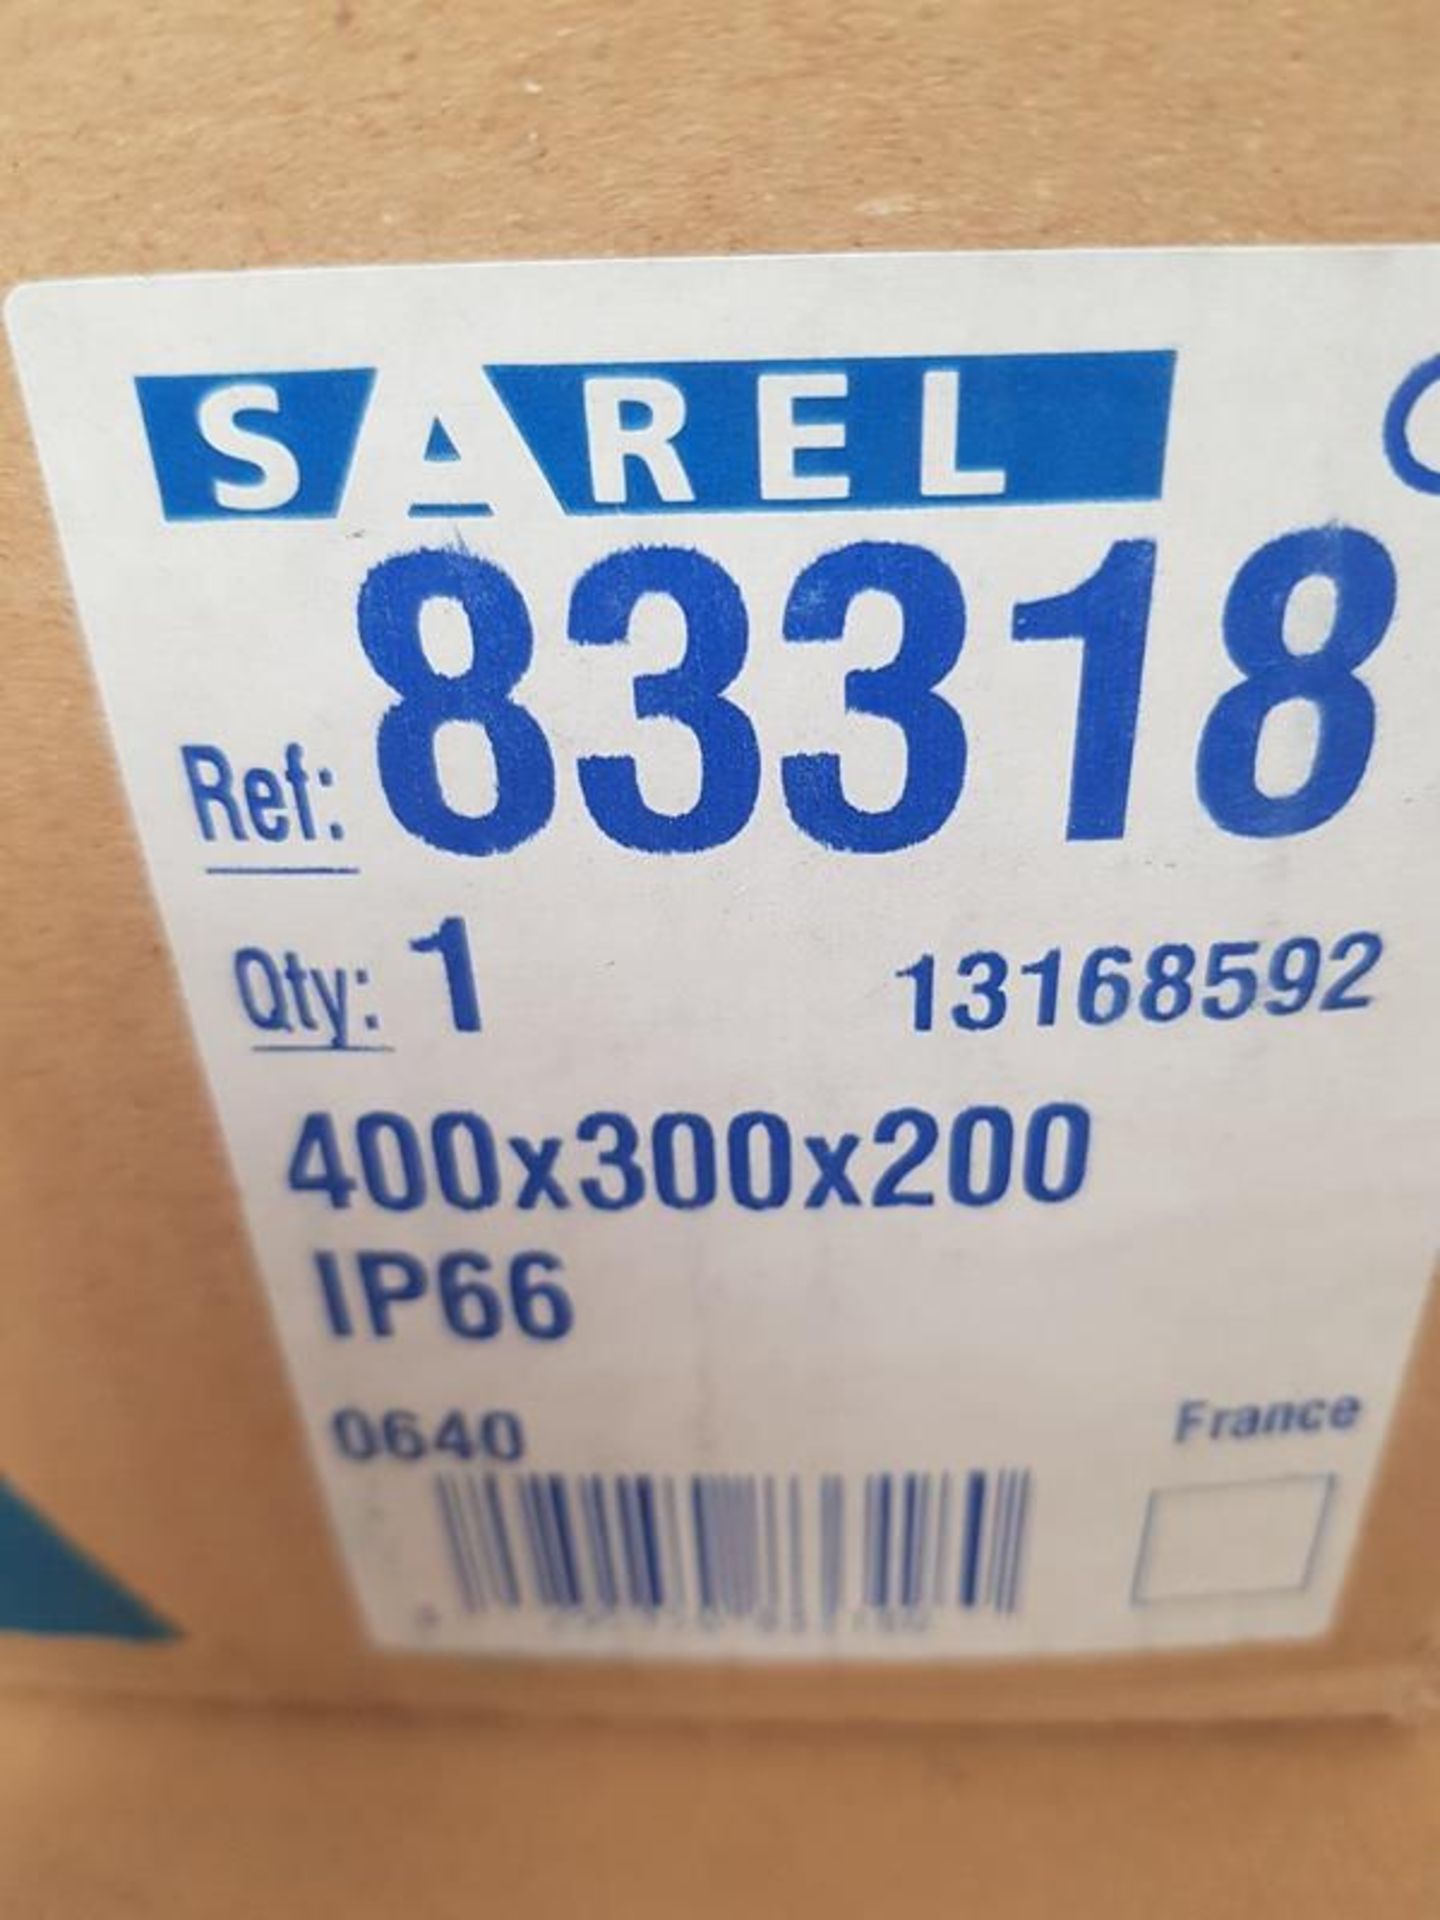 Sarel 83318 Electric cabinet, IP66, 400mm x 300mm x 200mm - Image 3 of 3